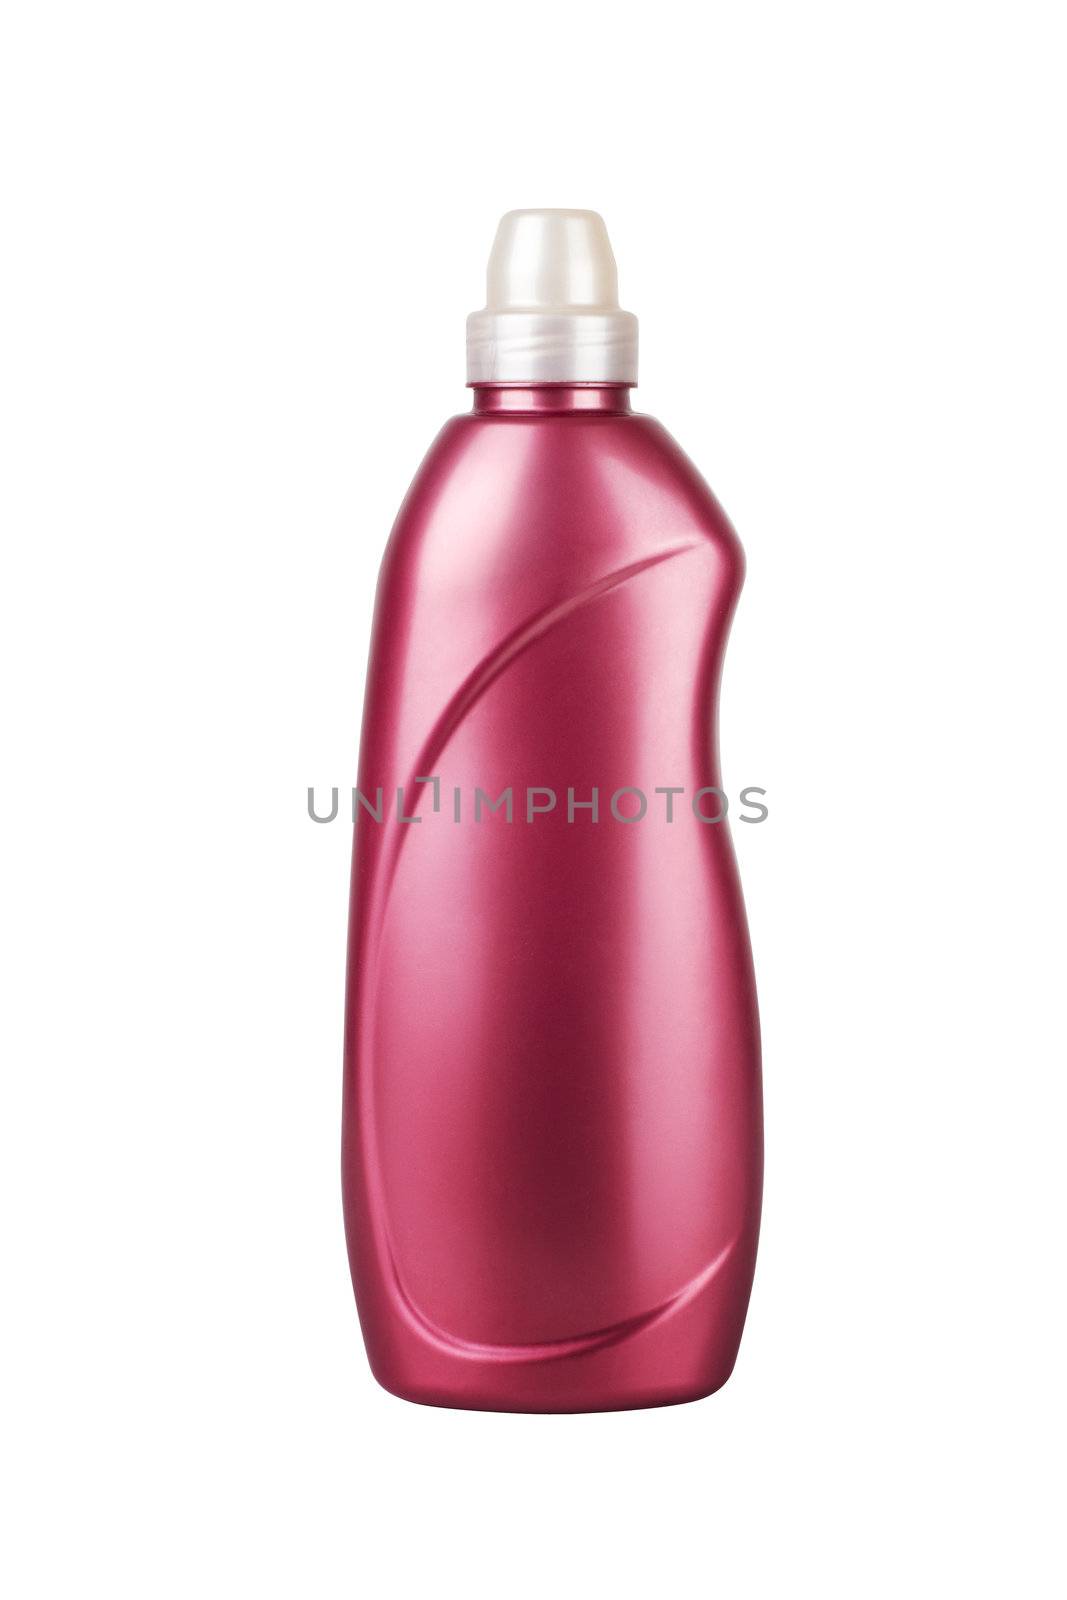 close up of beauty hygiene container on white background with clipping path by ozaiachin